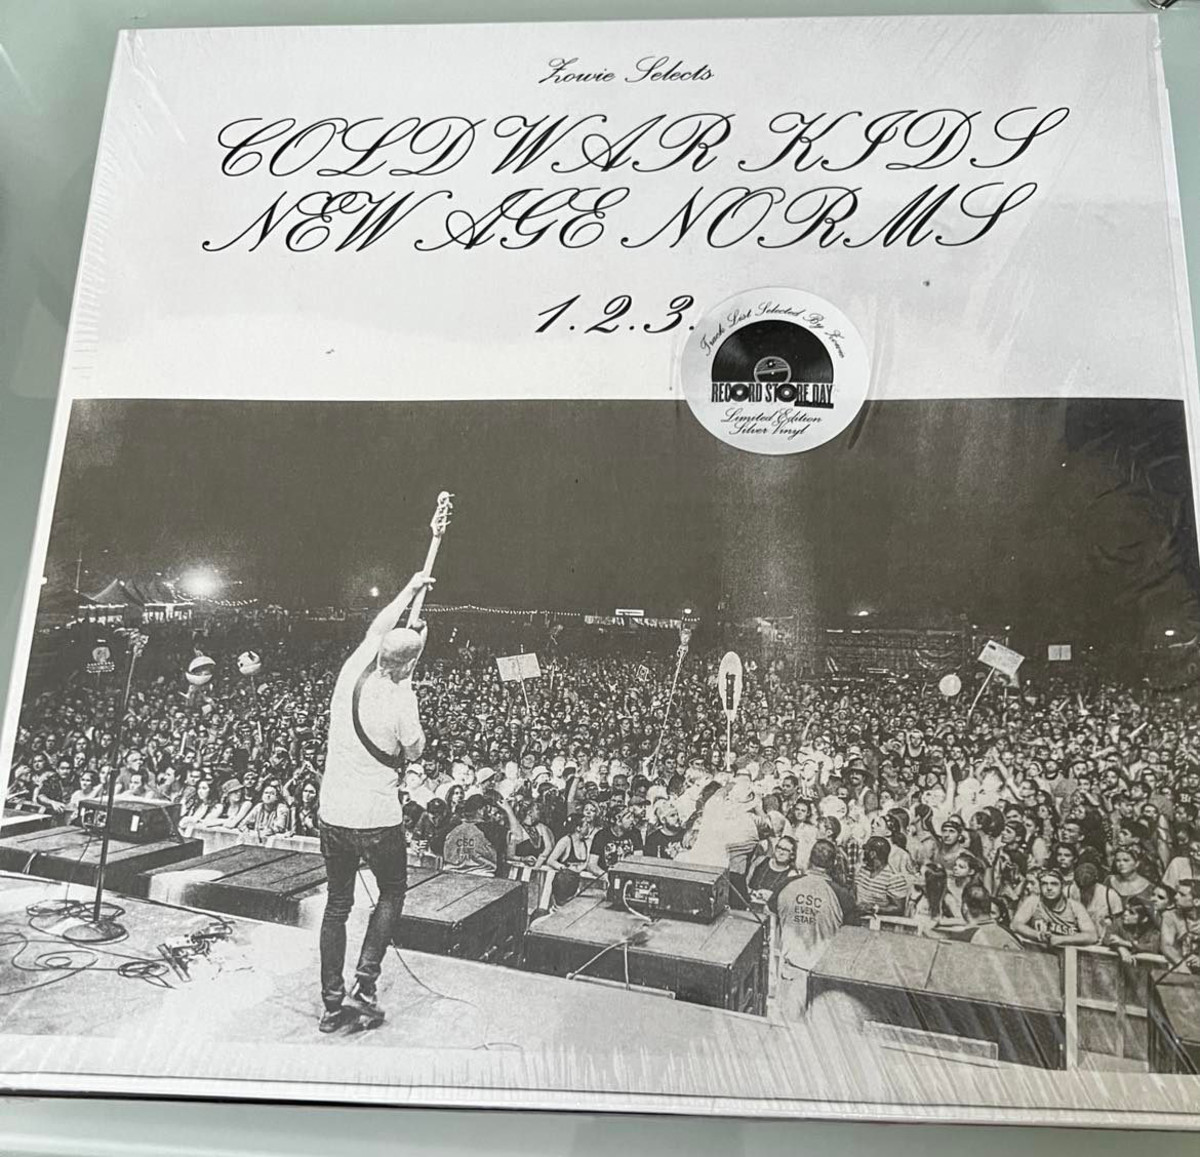 Cold War Kids RSD special release was limited to 500 copies.